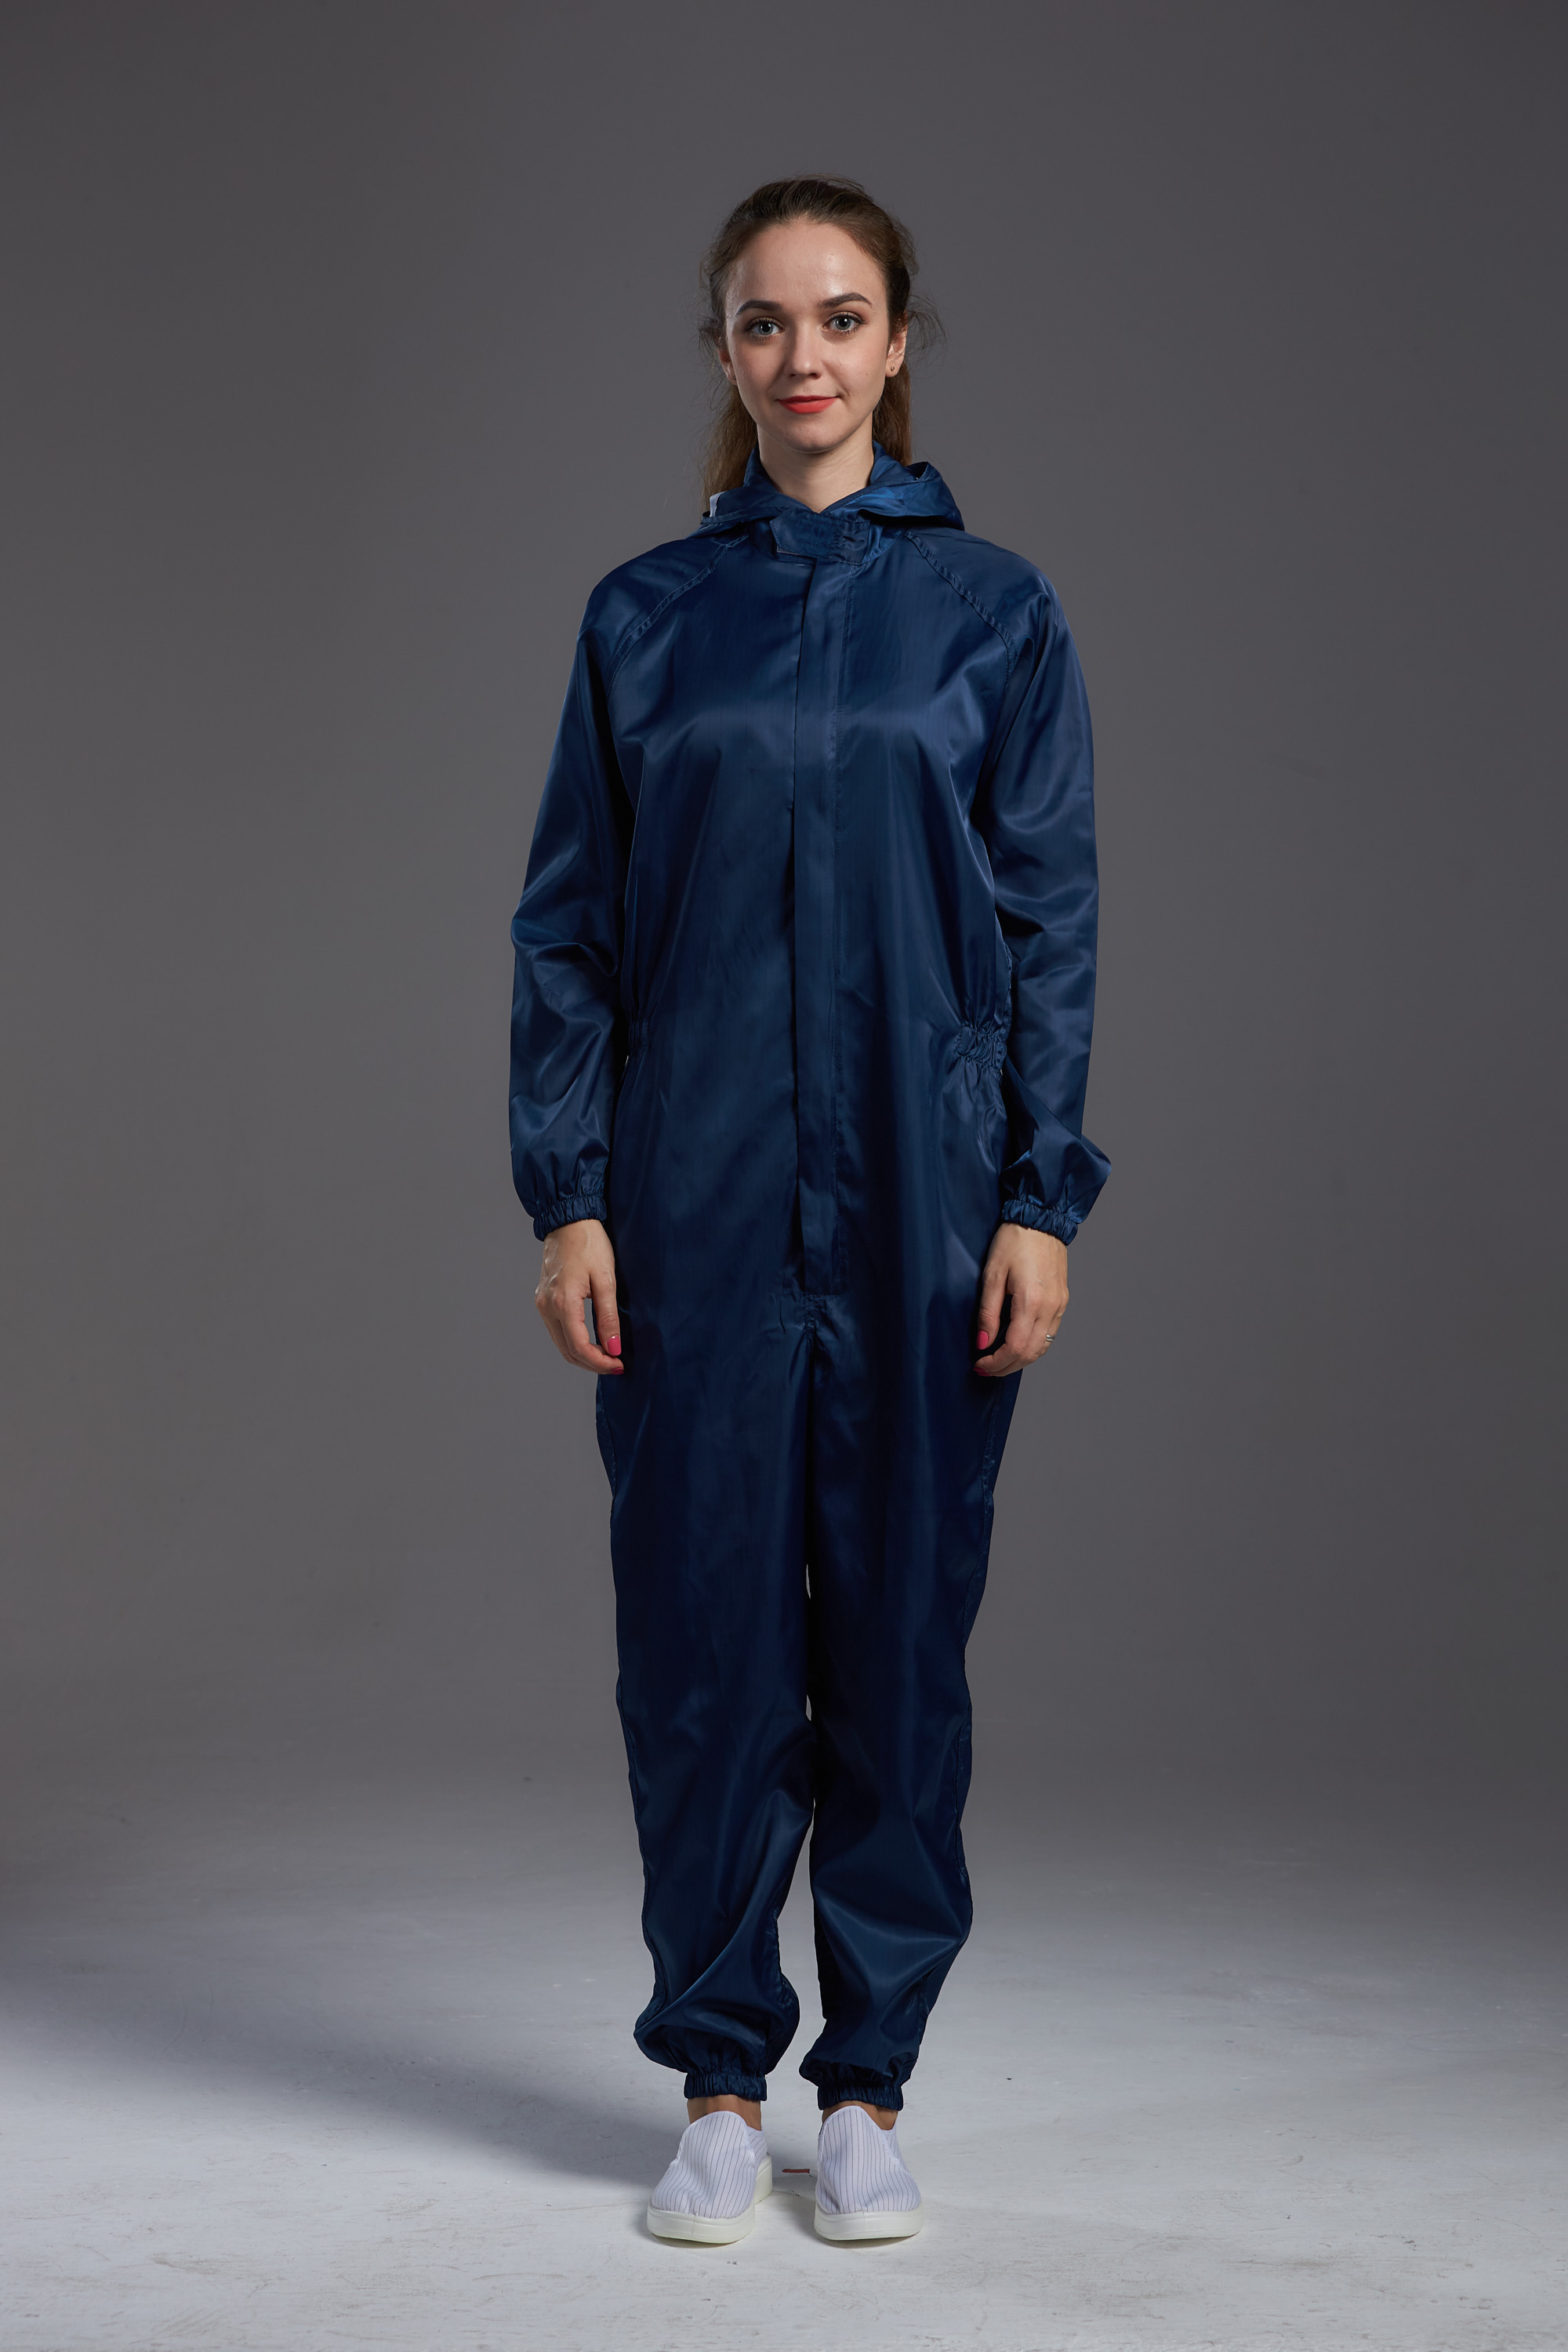 Best Food Processing Garment Resuable straight open zipper hooded coverall dark blue durable in food processing Workshop wholesale